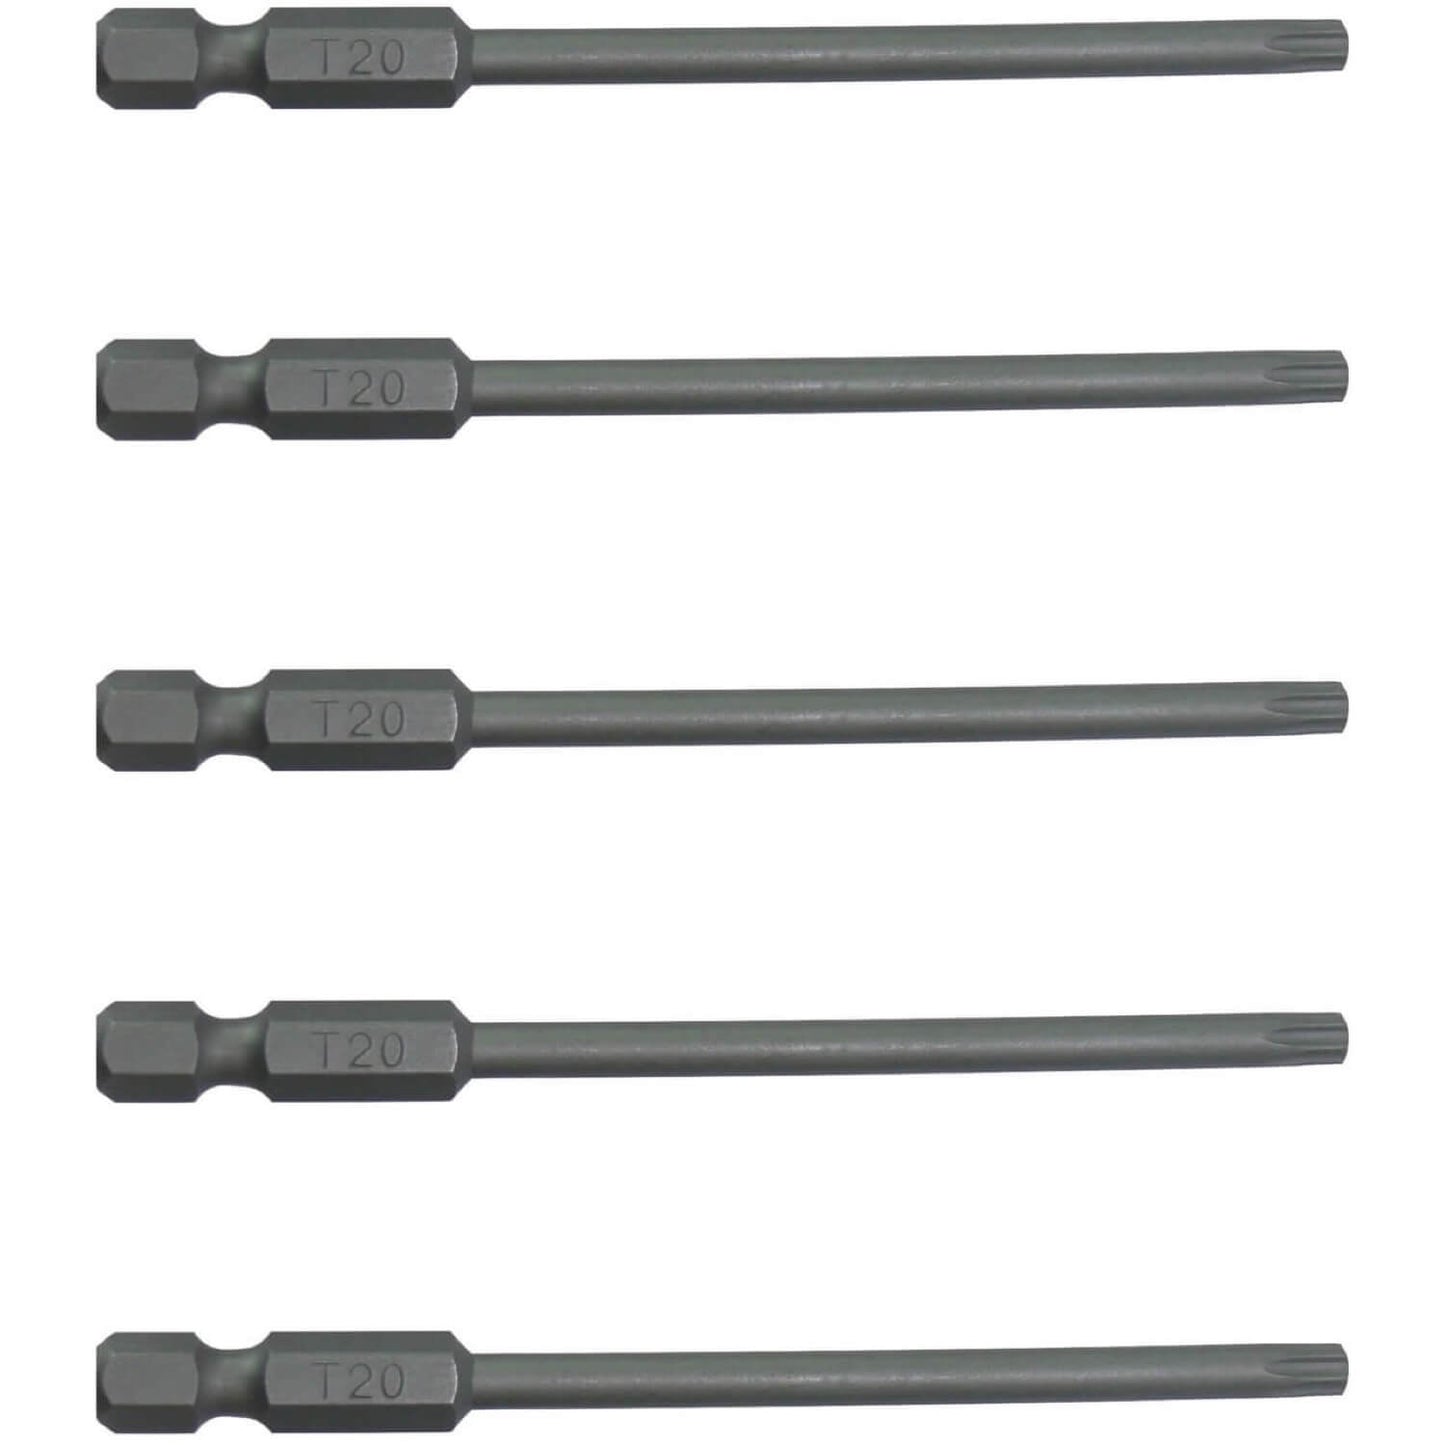 T20 (T-20) Torx/Star Driver Bit - Color Coded Torx/Star Drive Quick Change Shank Bit for Screws and Fasteners Requiring T20 (T-20)